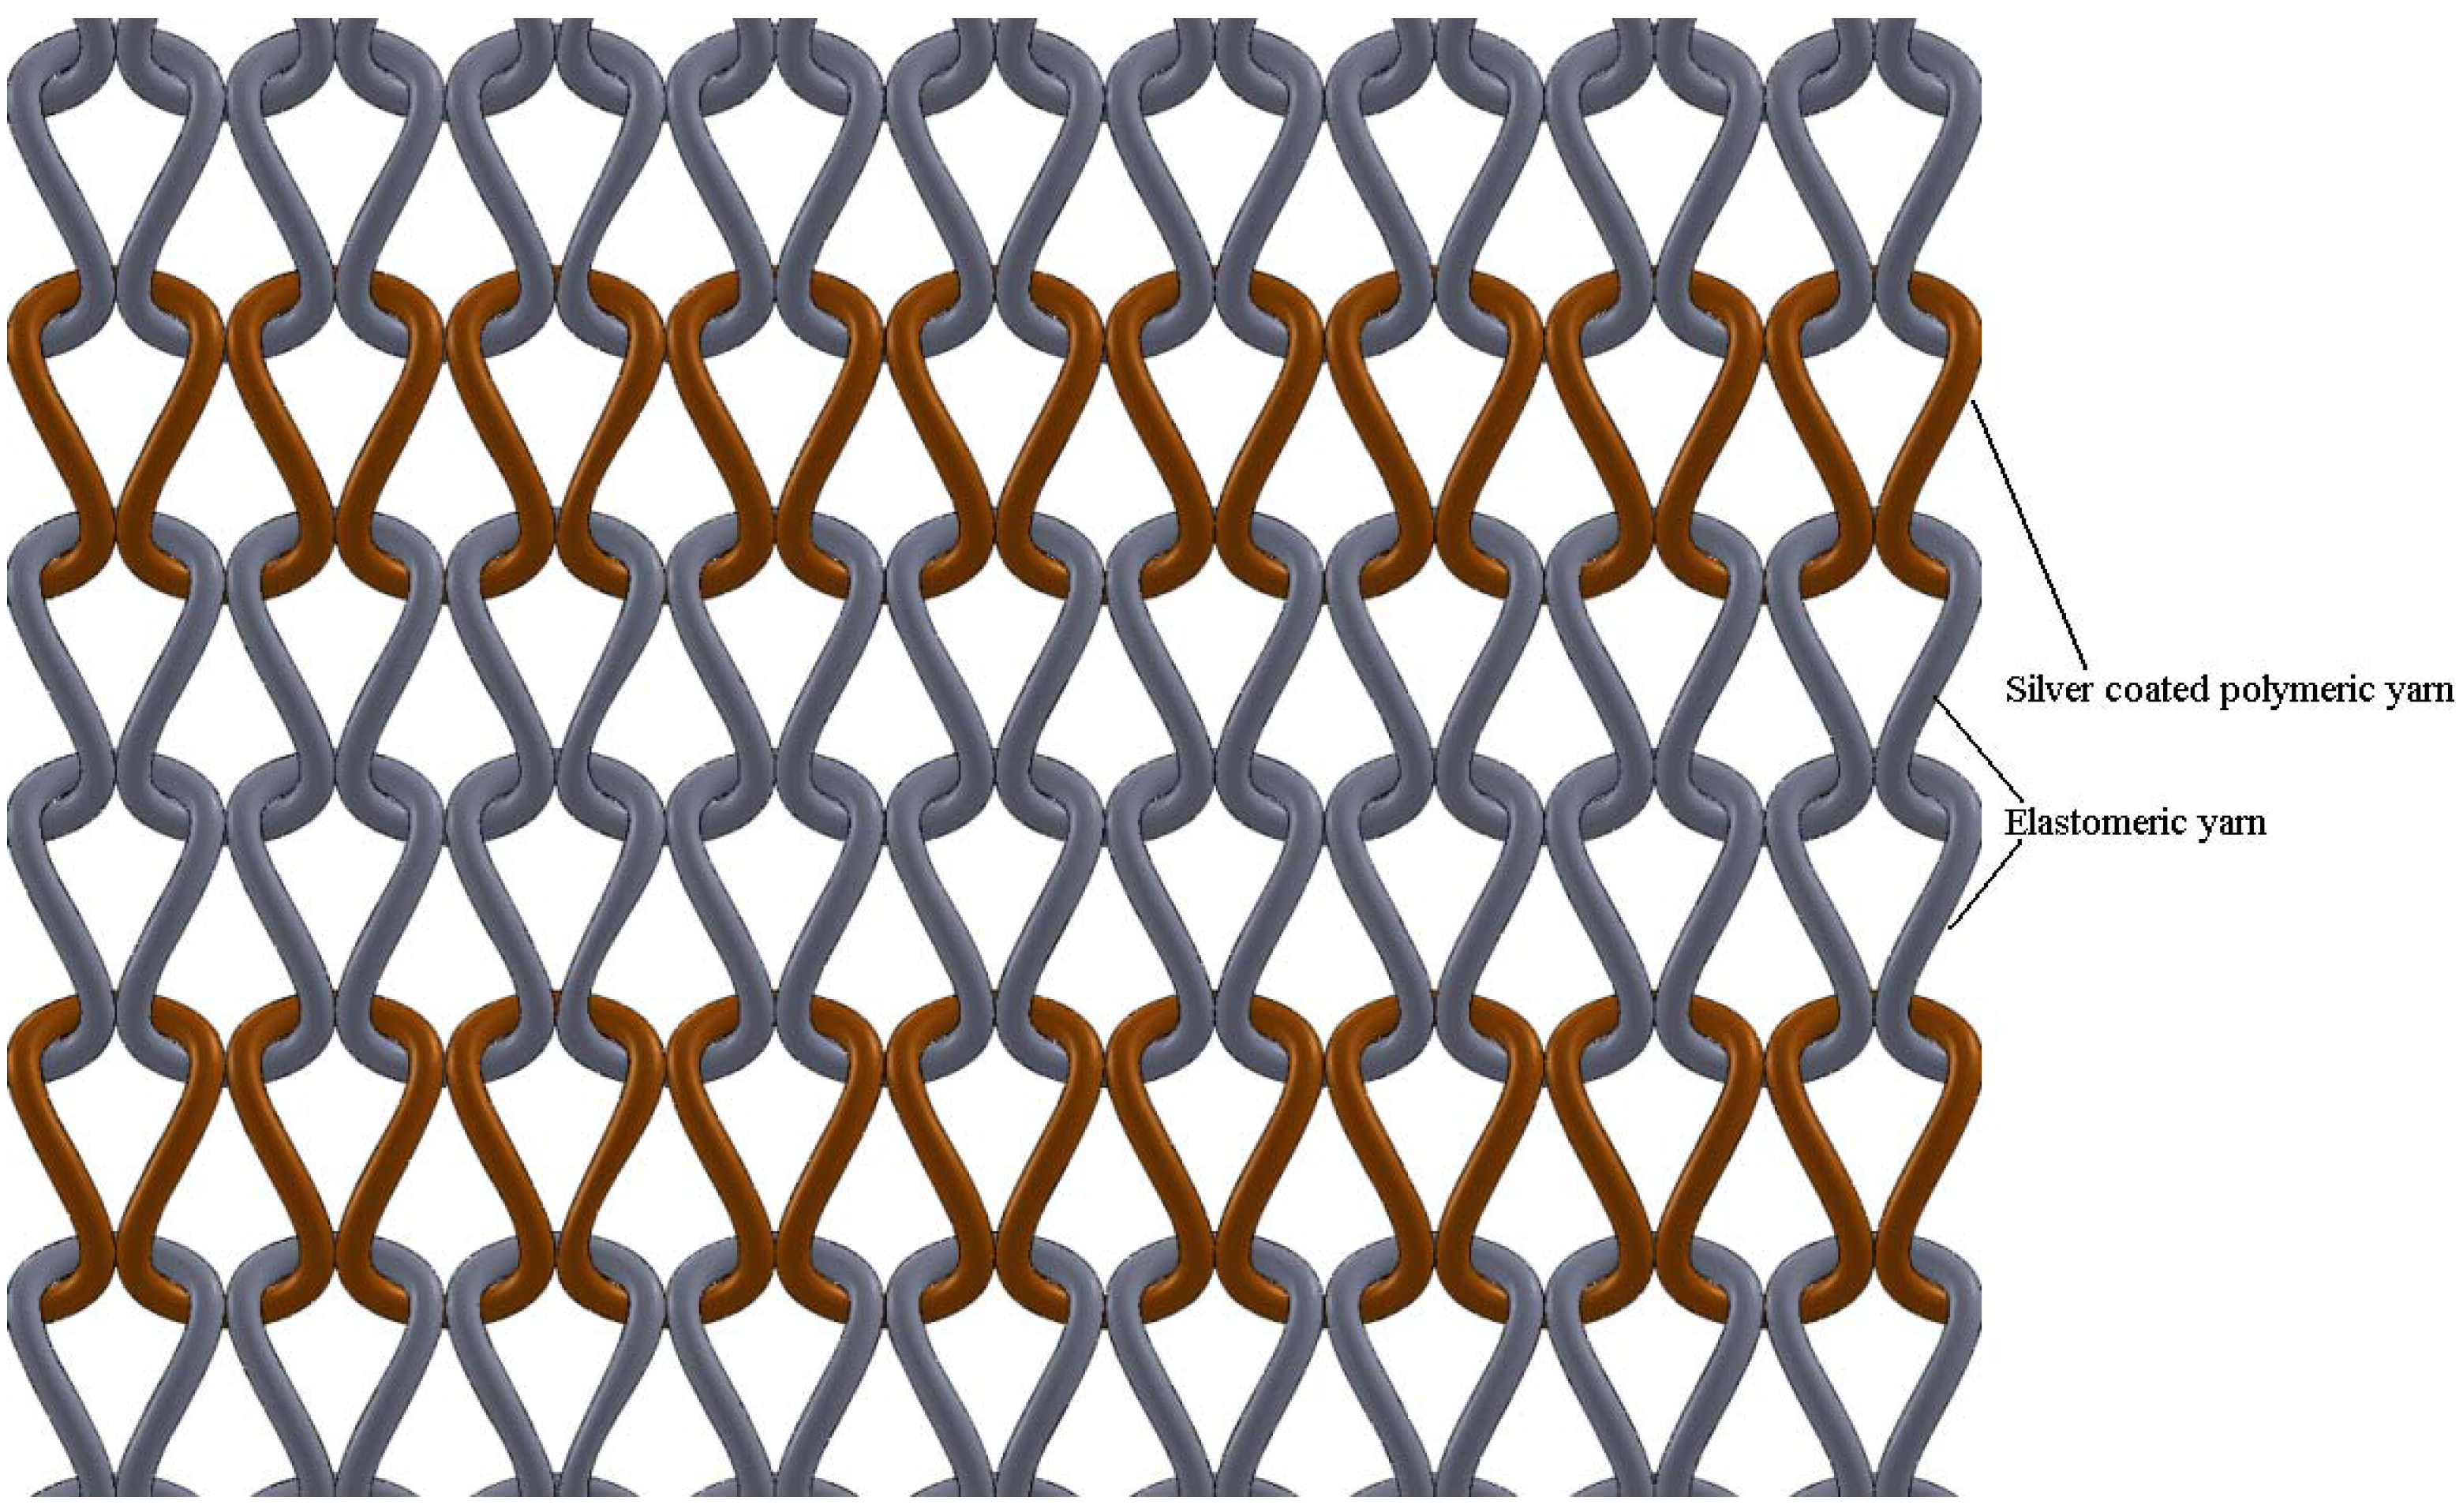 Copper Woven Wire Mesh: From 1 x 1 Mesh to 10 x 10 Mesh On Edward